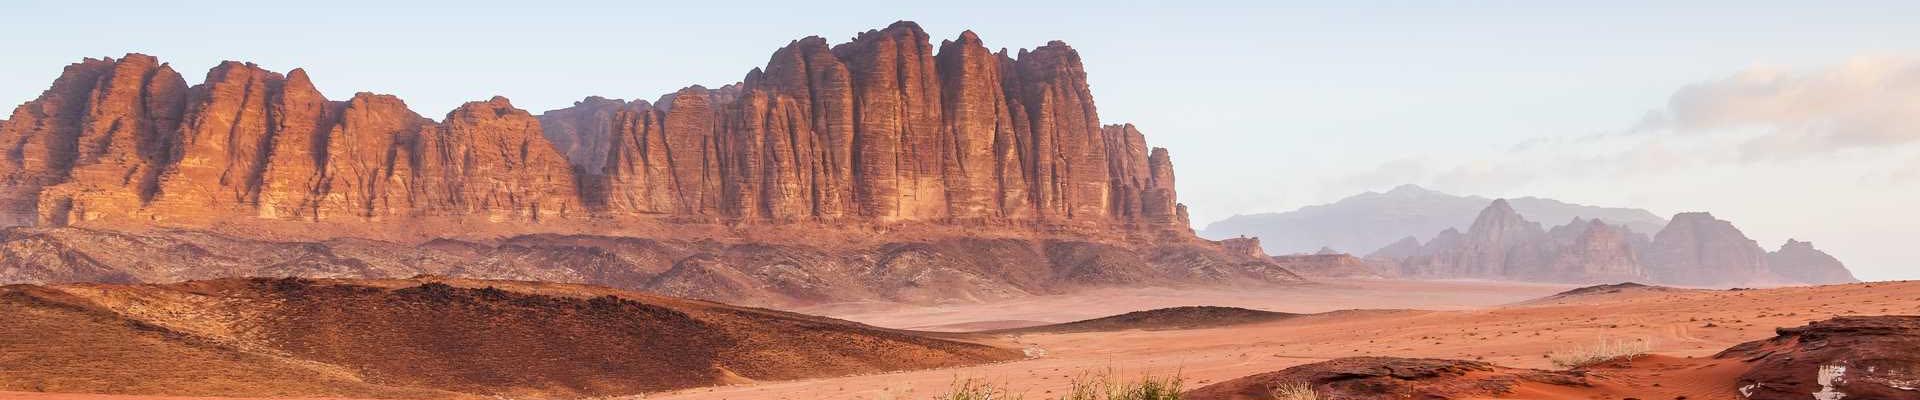 Go Jordan Travel and Tourism Announces Exciting Family Holidays in Jordan